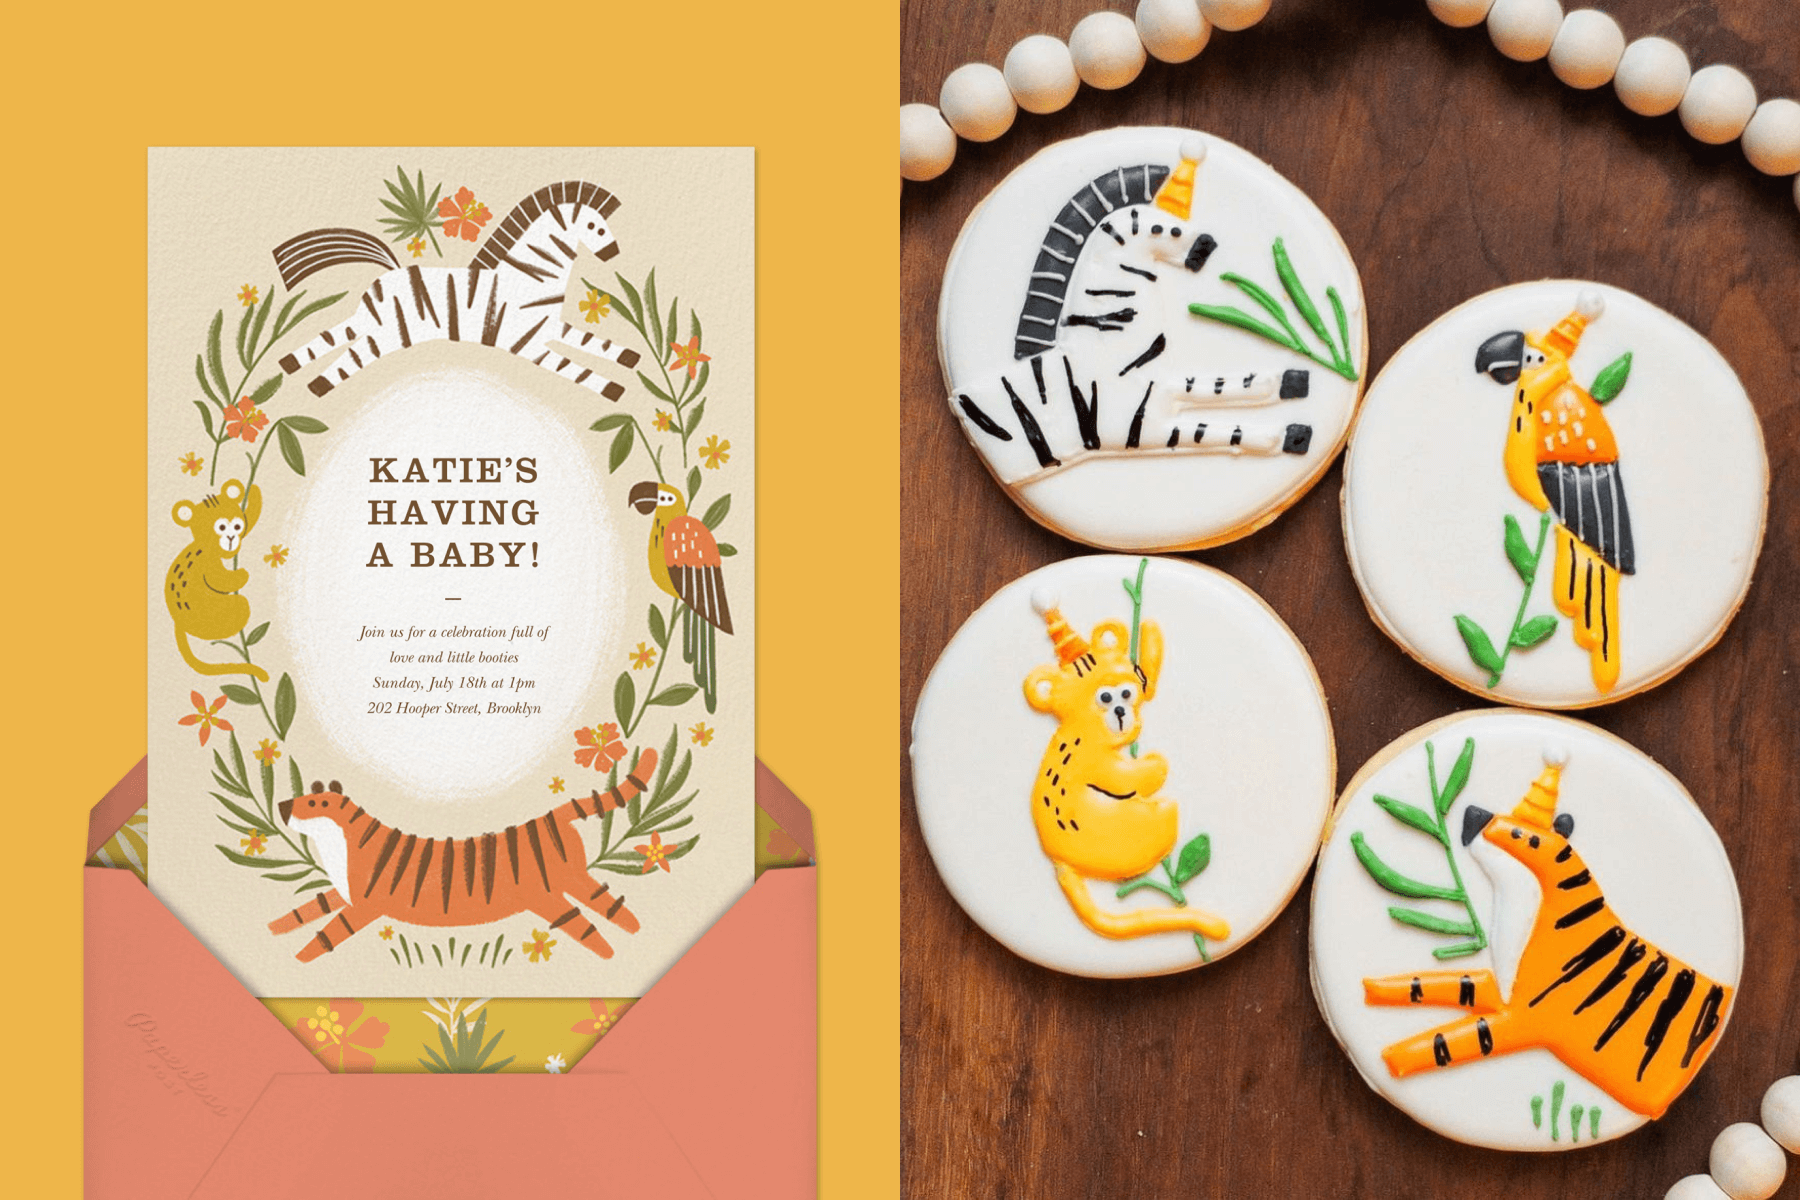 left: A baby shower invitation with a border of illustrated safari animals. Right: sugar cookies with decorative safari animal icing. 